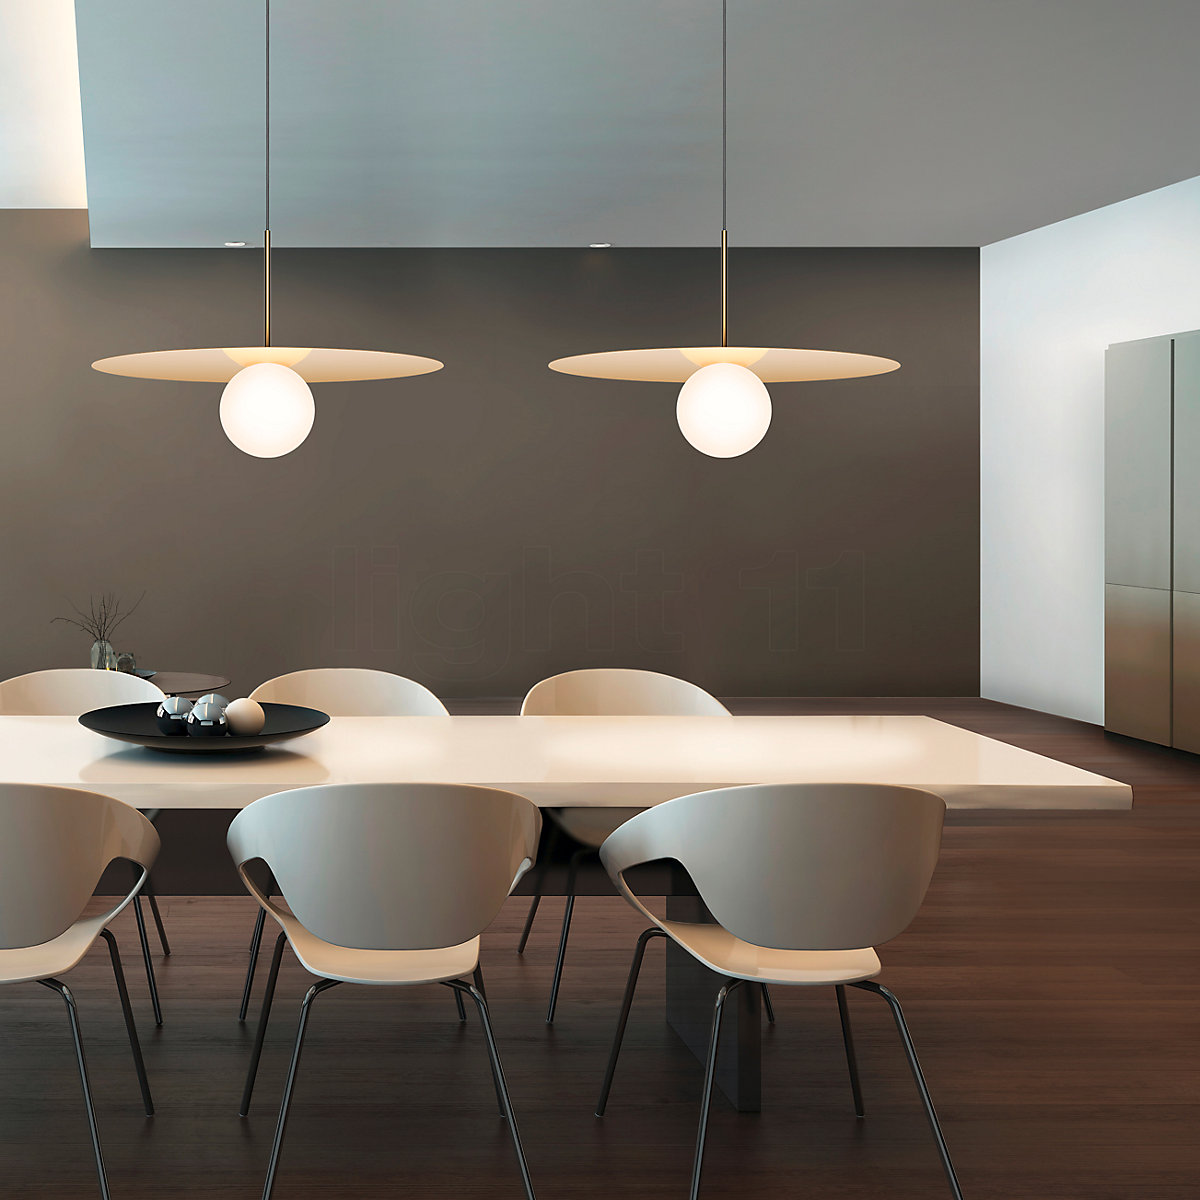 activering Knipperen Passief Buy Pablo Designs Bola Disc Pendant Light LED at light11.eu